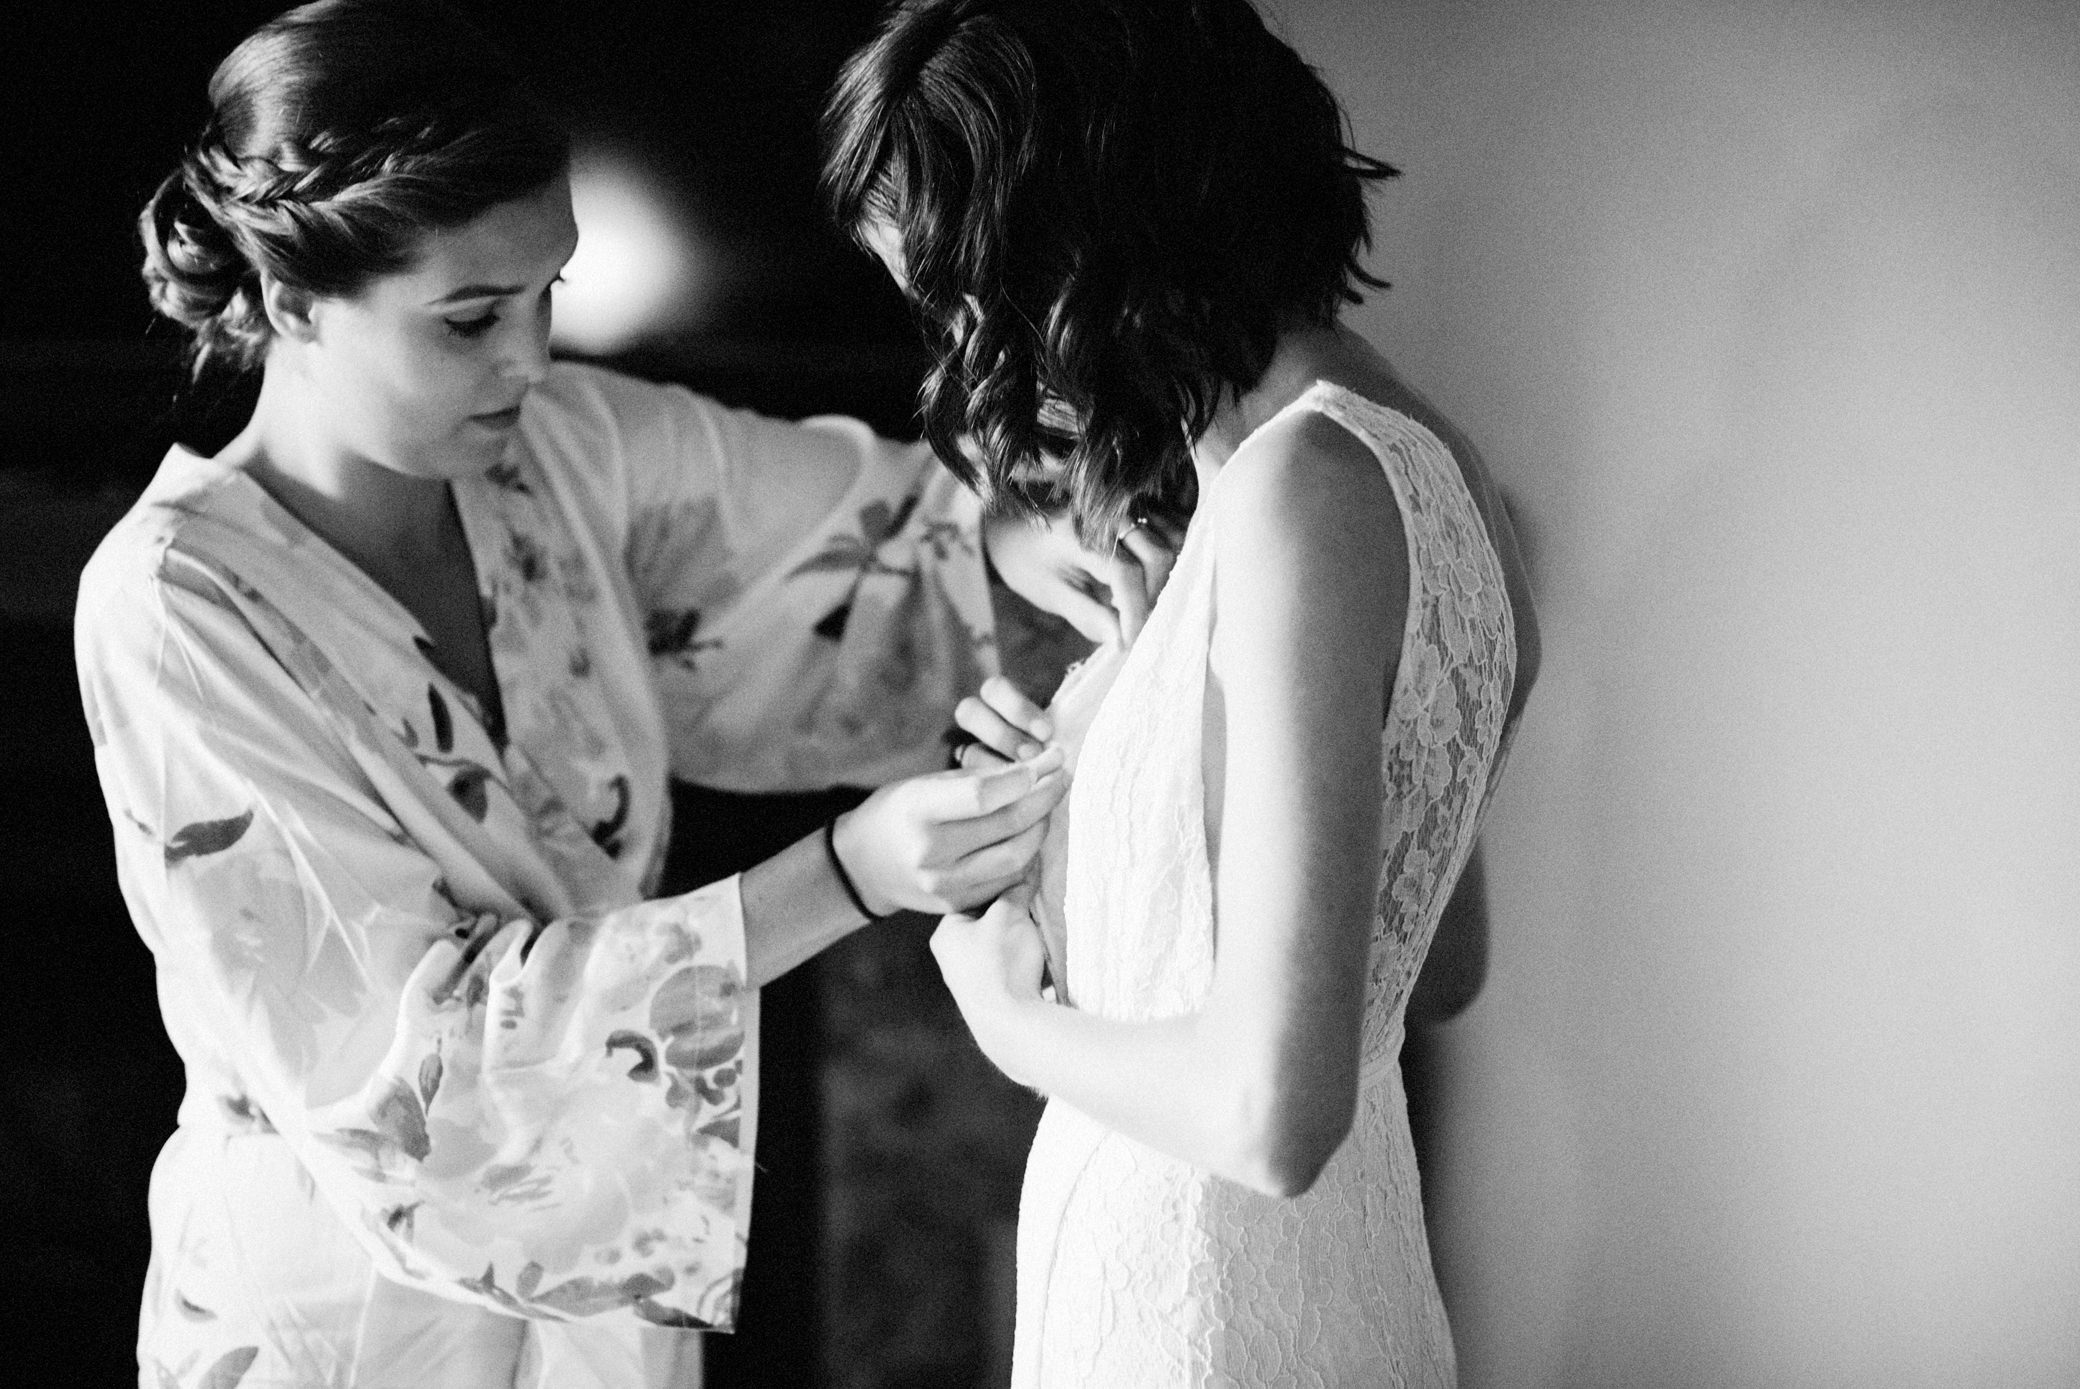 Zoe's sister helps her get dressed for her wedding at Willows Lodge, Washington, Summer 2016